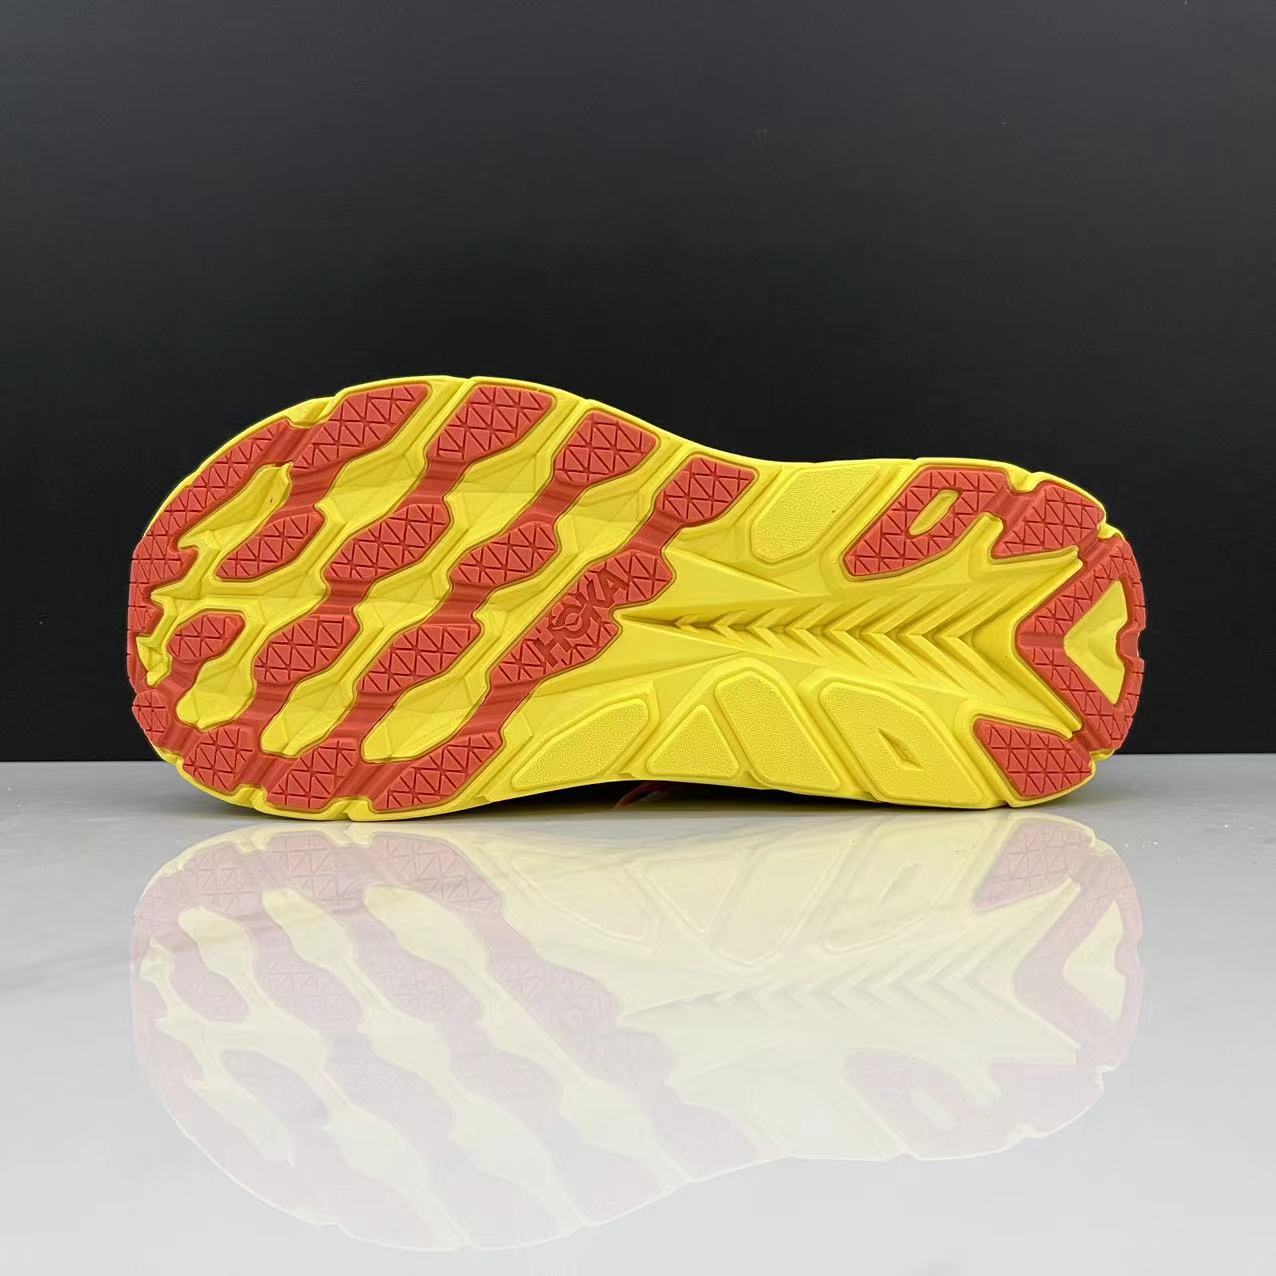 HOKA ONE Clifton 8 Running Trainers Illuminating Yellow Breathable Anti Slip Sports Shoes  yellow and red soles 